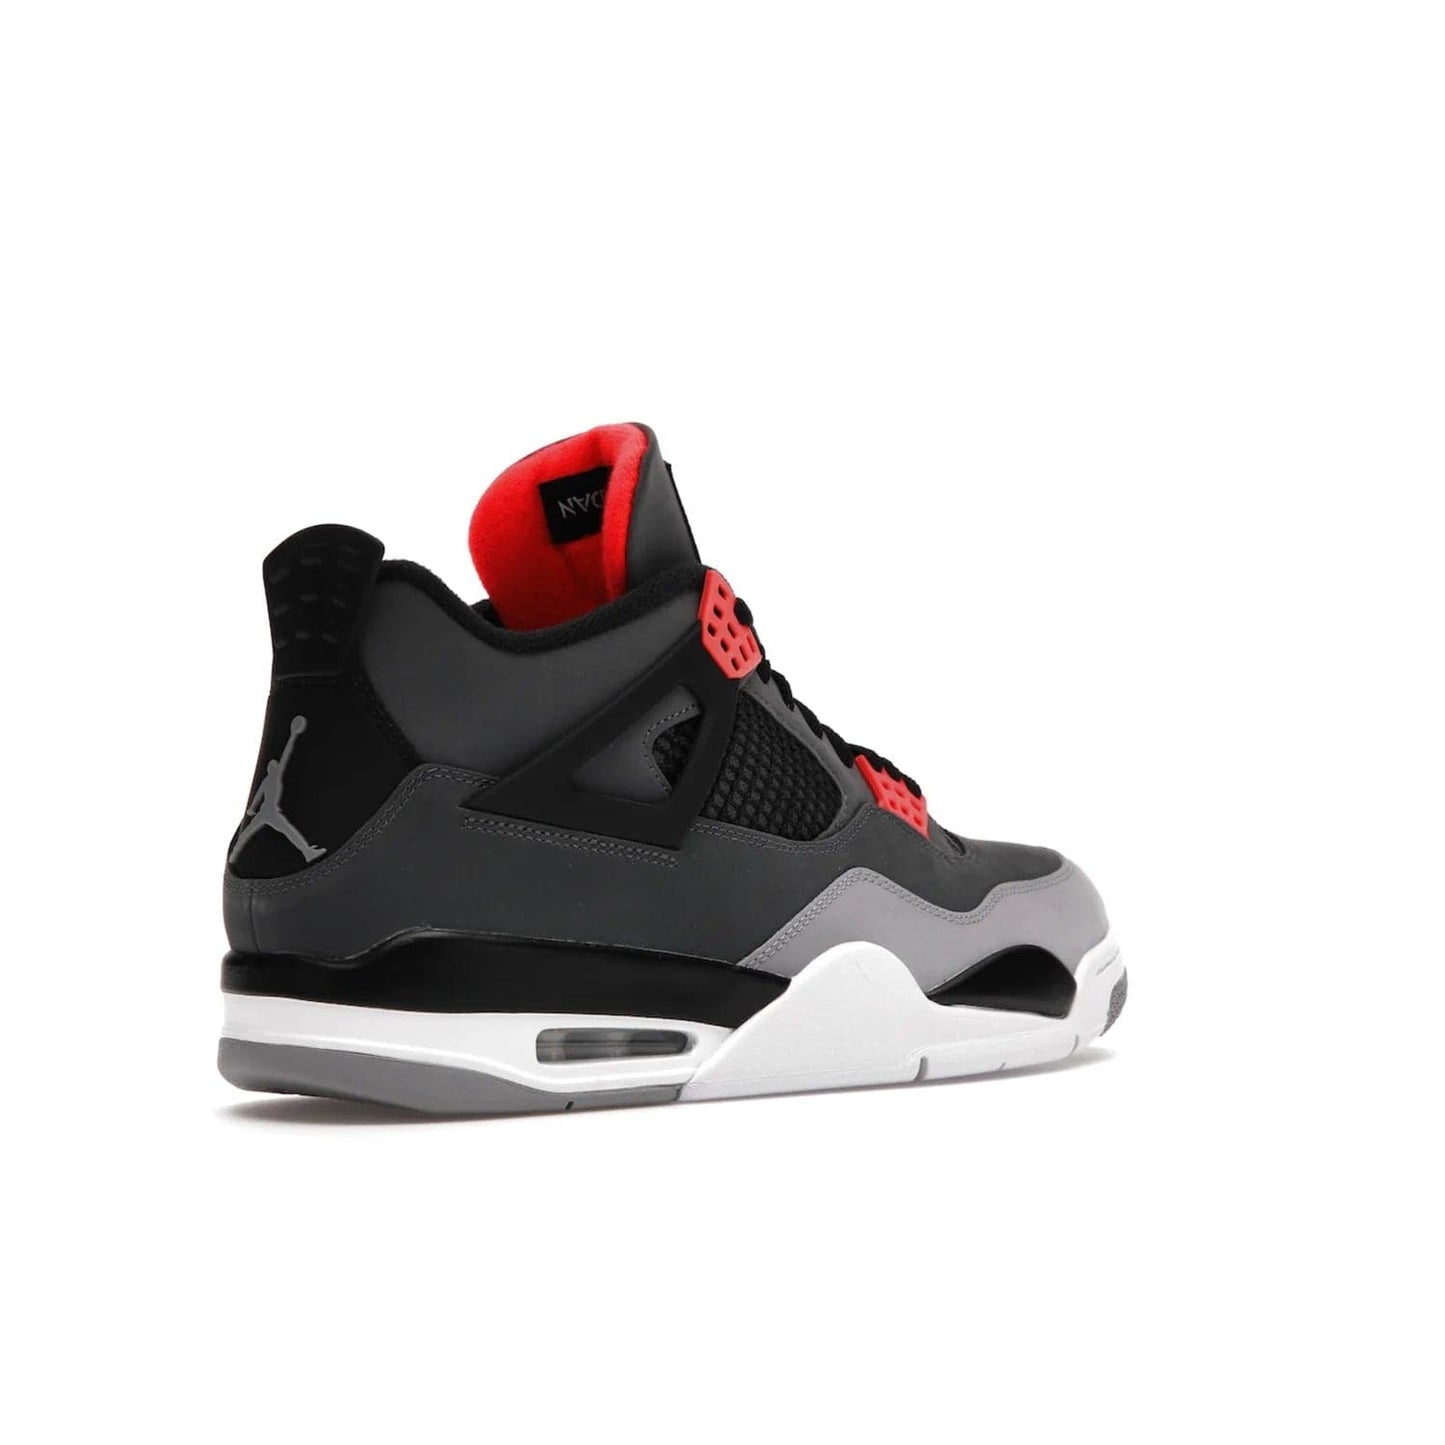 Jordan 4 Retro Infrared - Image 33 - Only at www.BallersClubKickz.com - Introducing the classic & timeless Air Jordan 4 Infrared. Durabuck upper, TPU mesh inserts, tech straps & heel tabs in dark grey and infrared accents. White sole with visible Air units. Out June 15, 2022. Get your pair now!